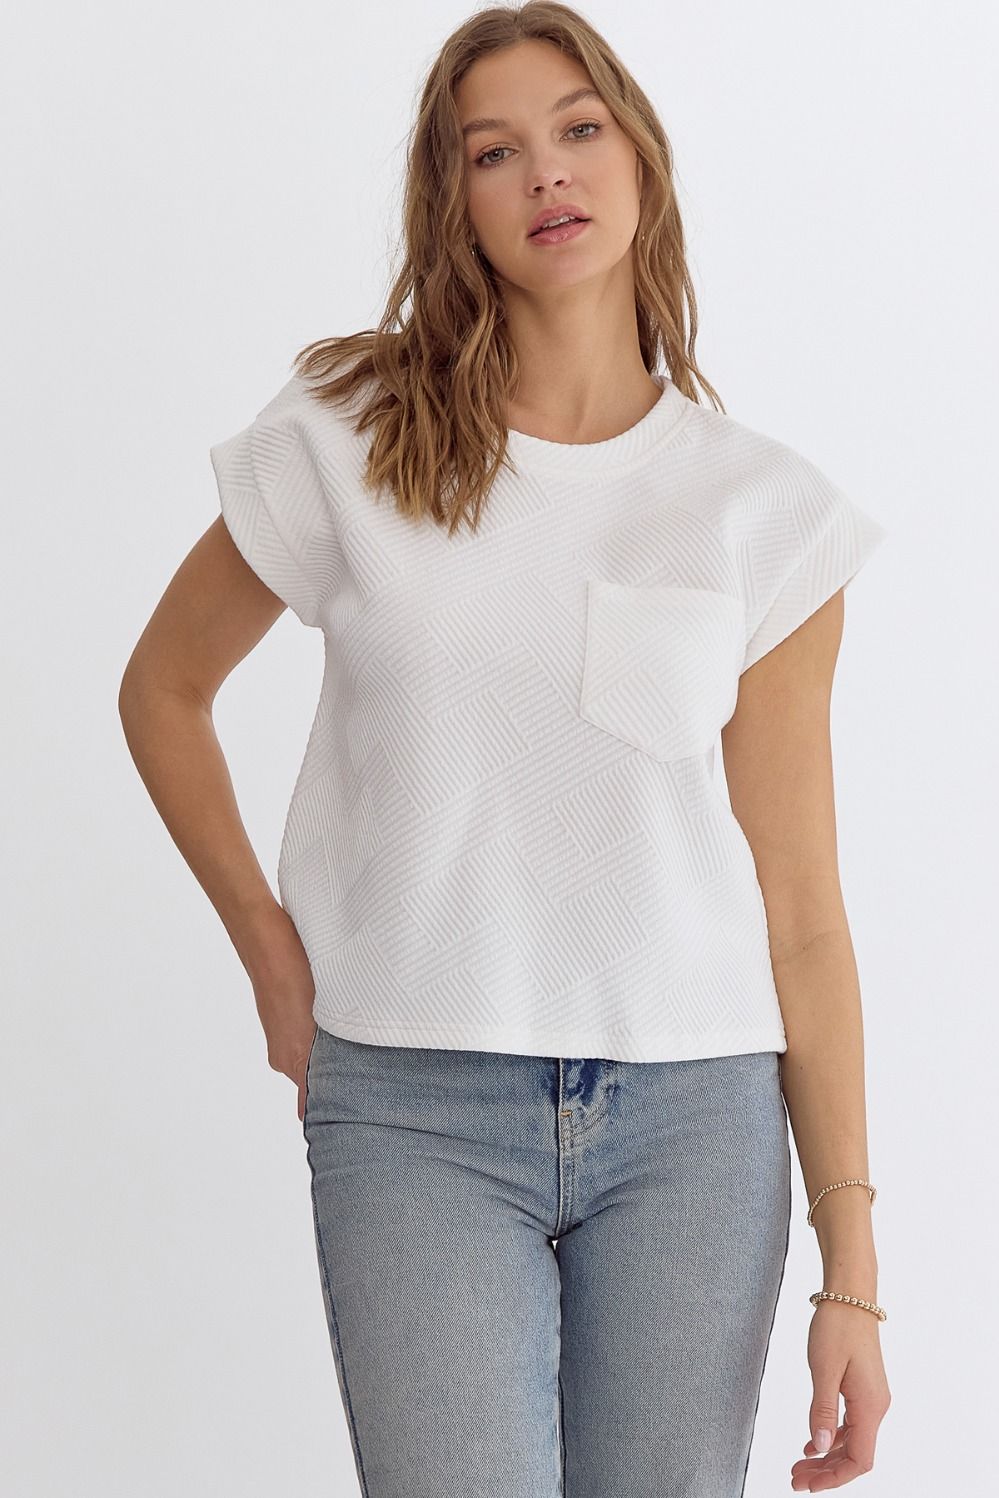 Entro | White Textured Casual Top | Sweetest Stitch Online Boutique